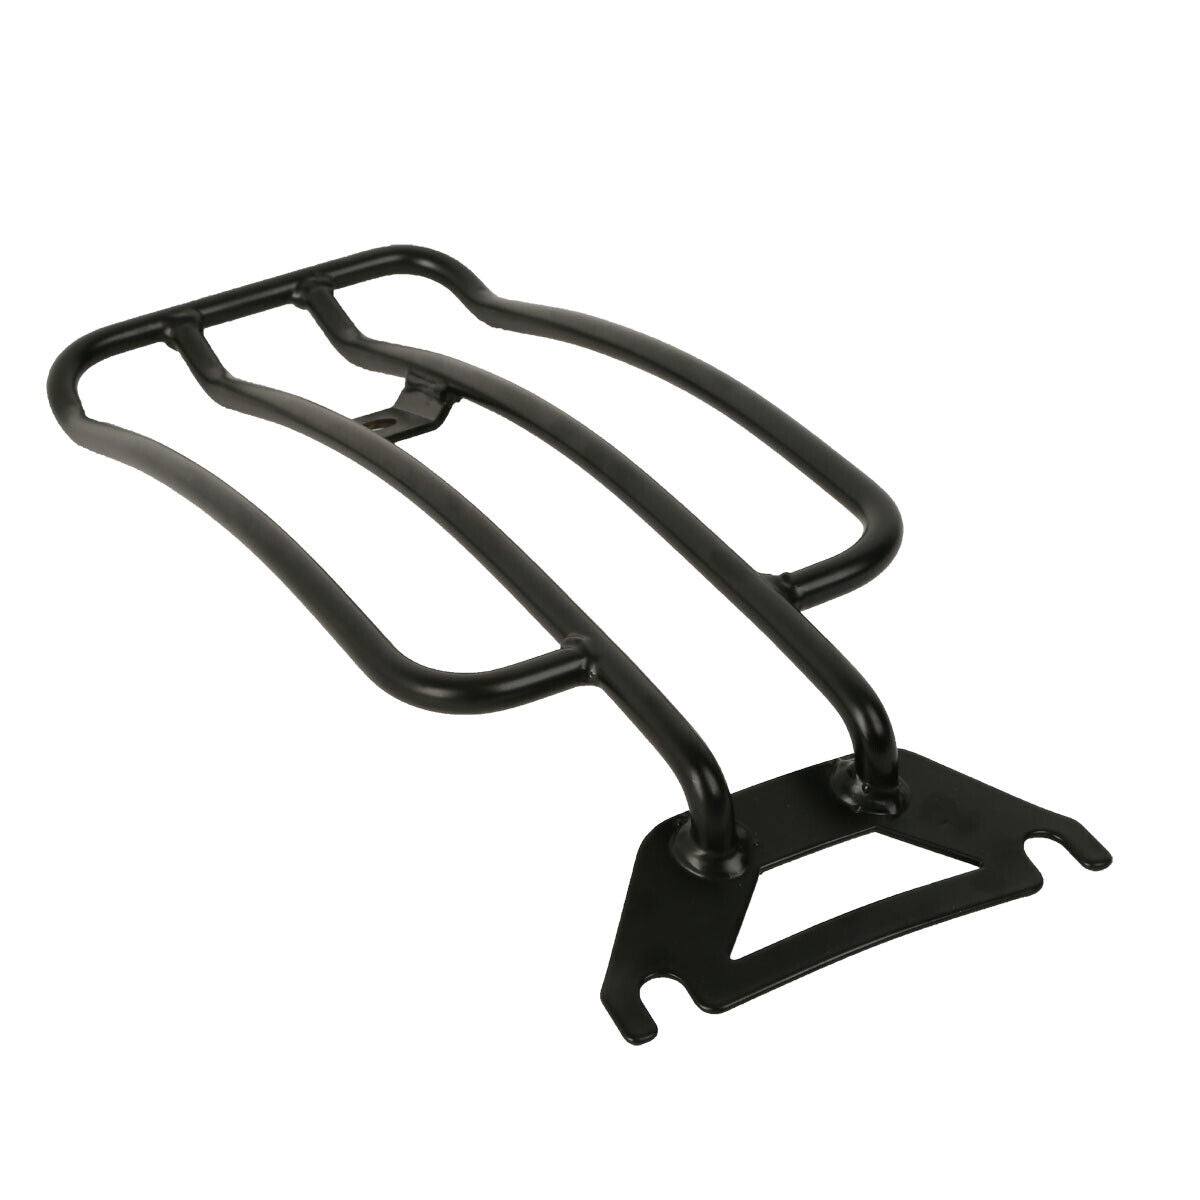 Solo Seat Luggage Rack Fit For Harley Touring Electra Street Glide 97-Up1 Black - Moto Life Products